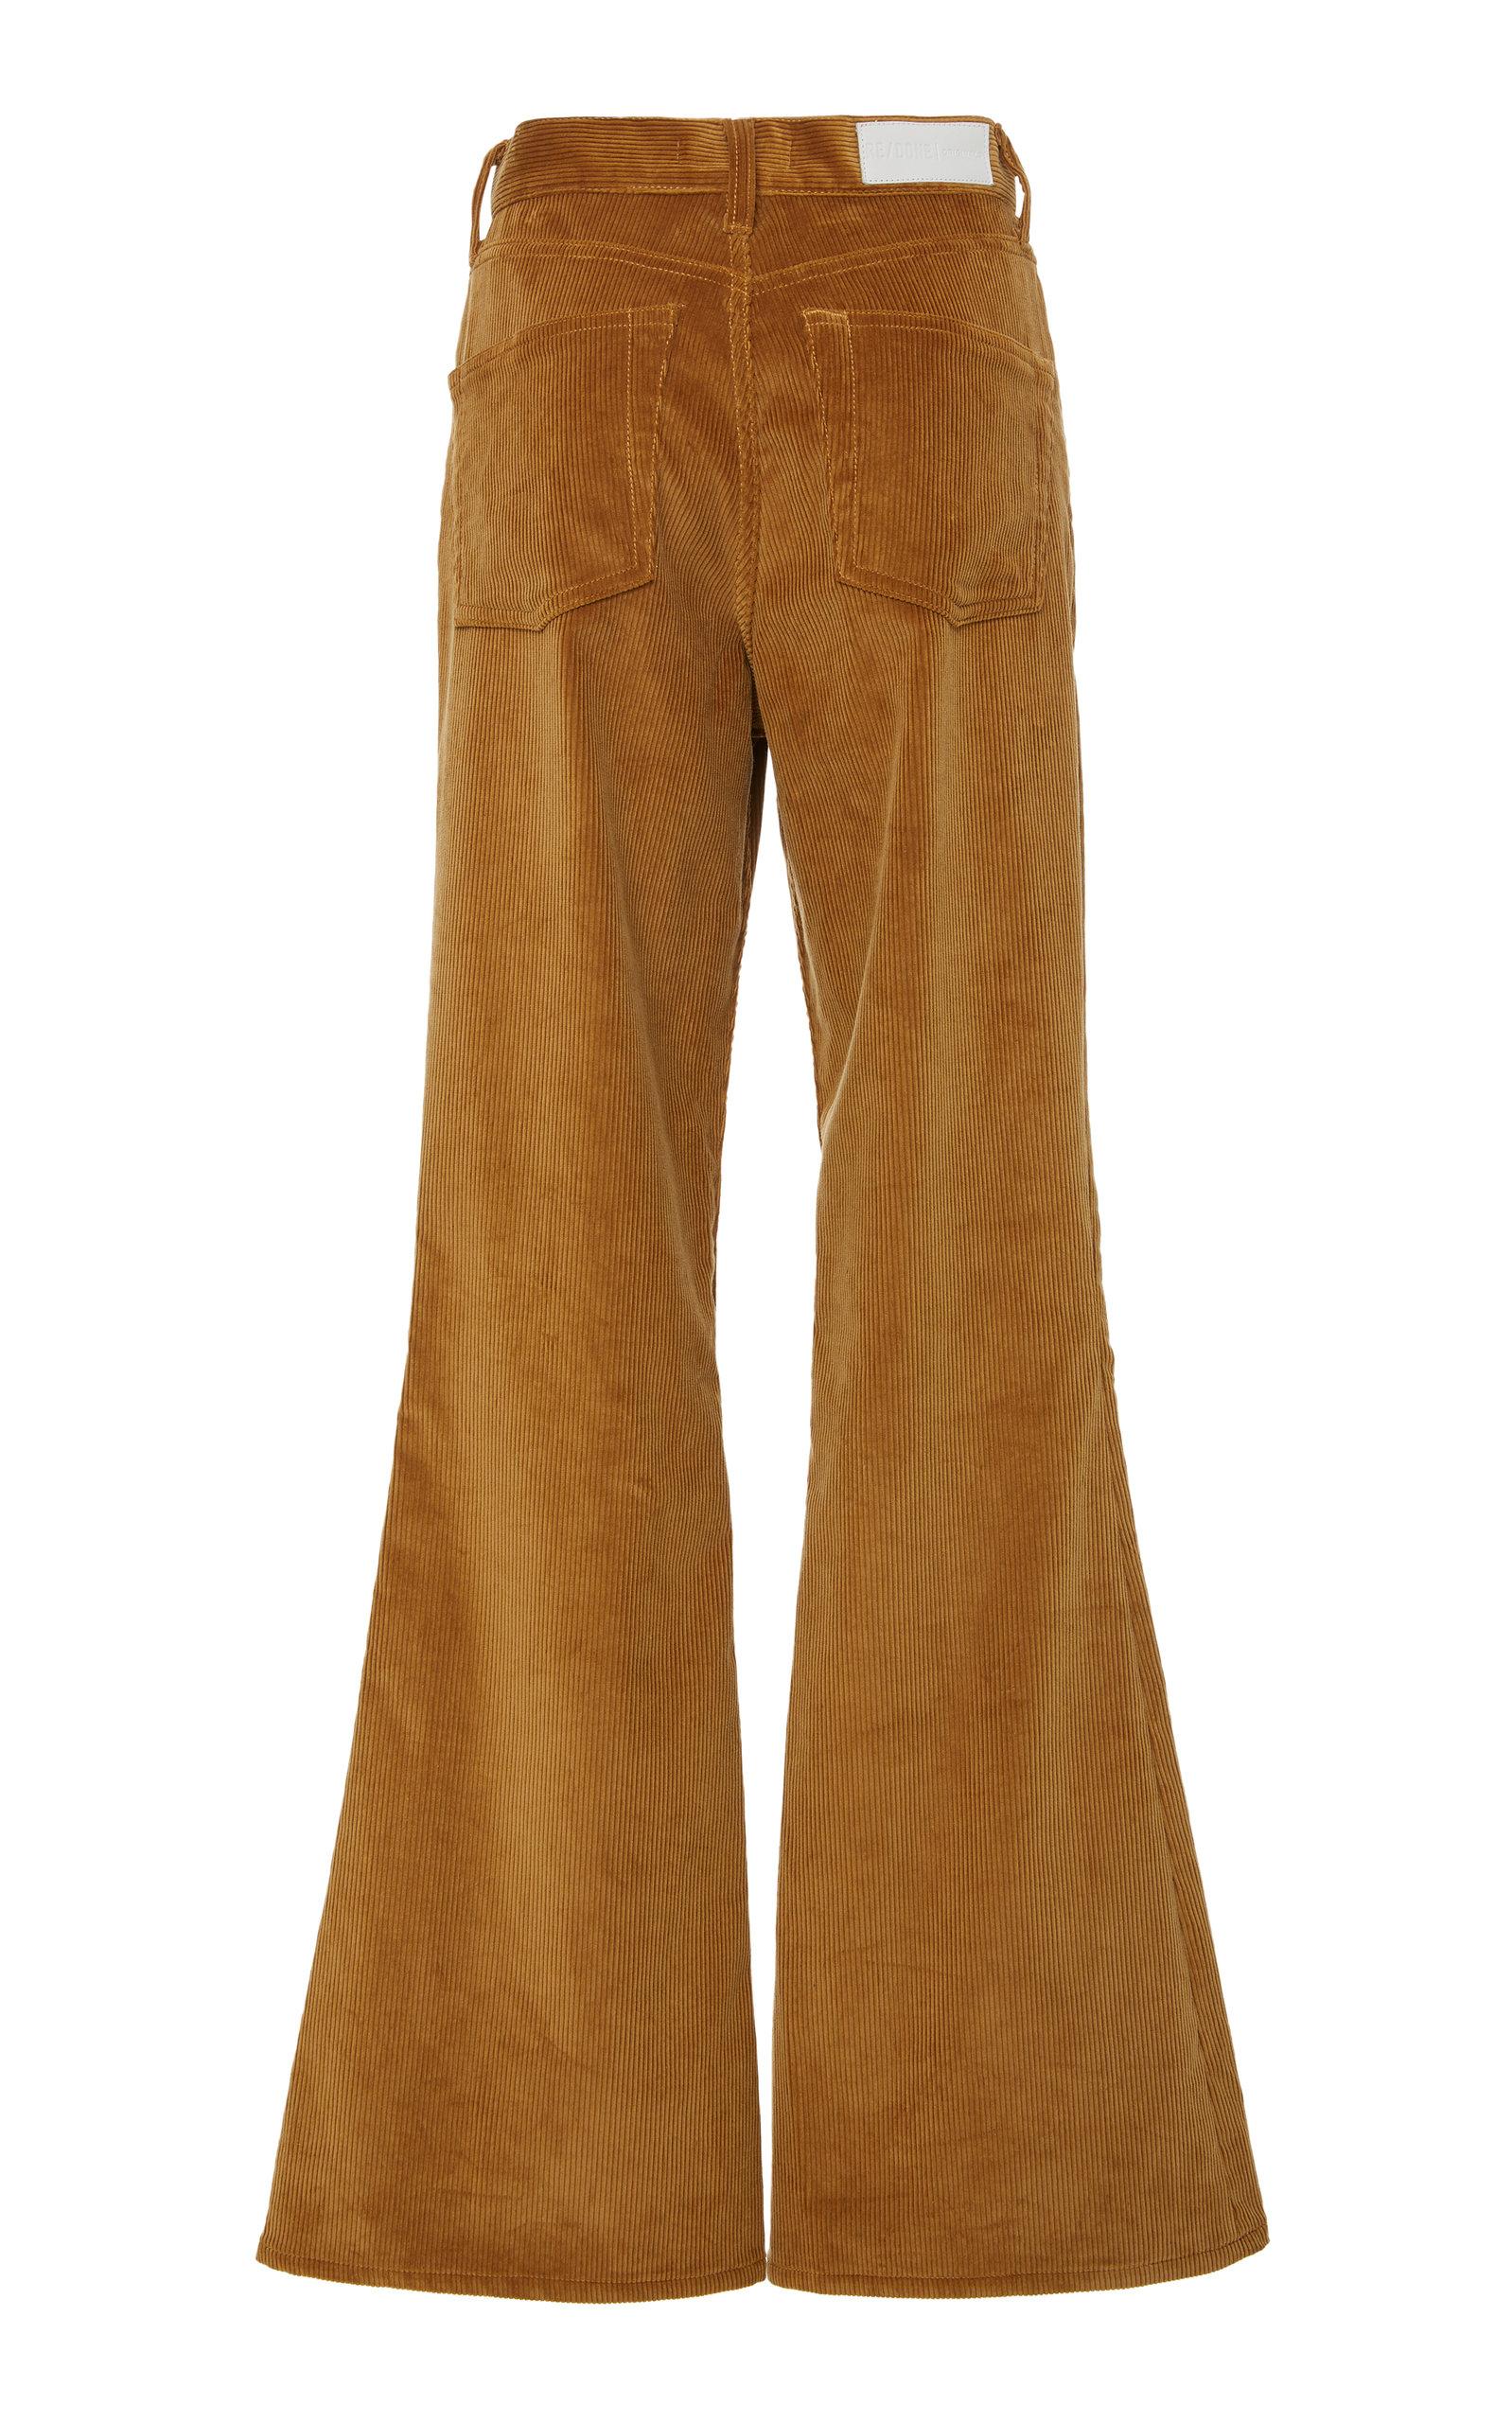 RE/DONE Cotton-corduroy Flared Pants in Brown - Lyst